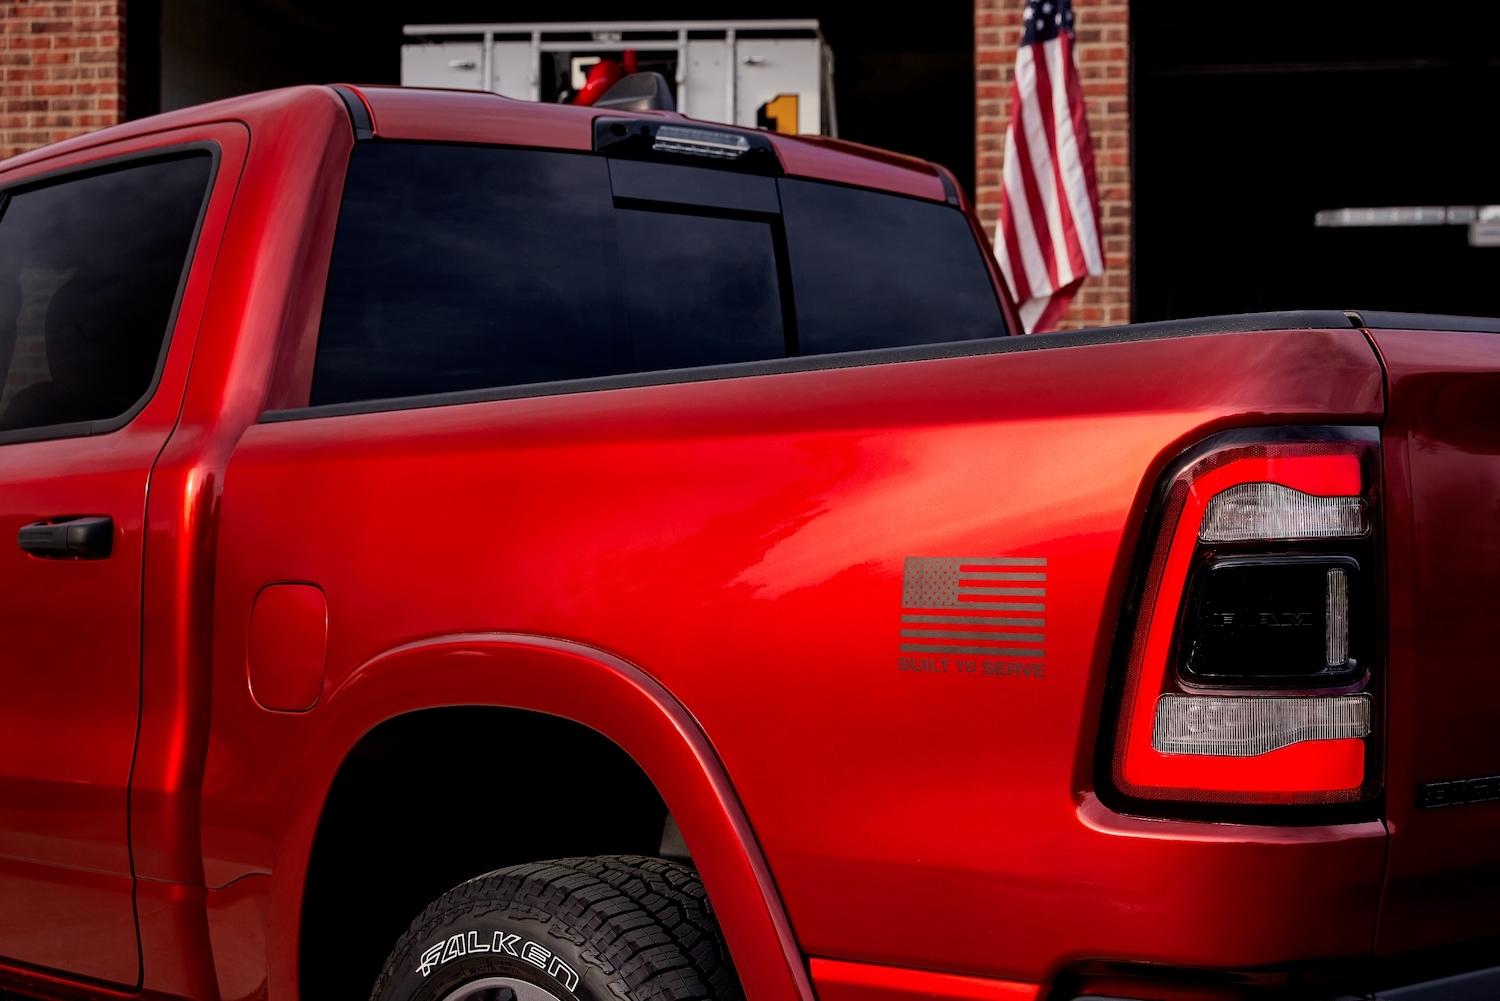 American flag decal on a special edition